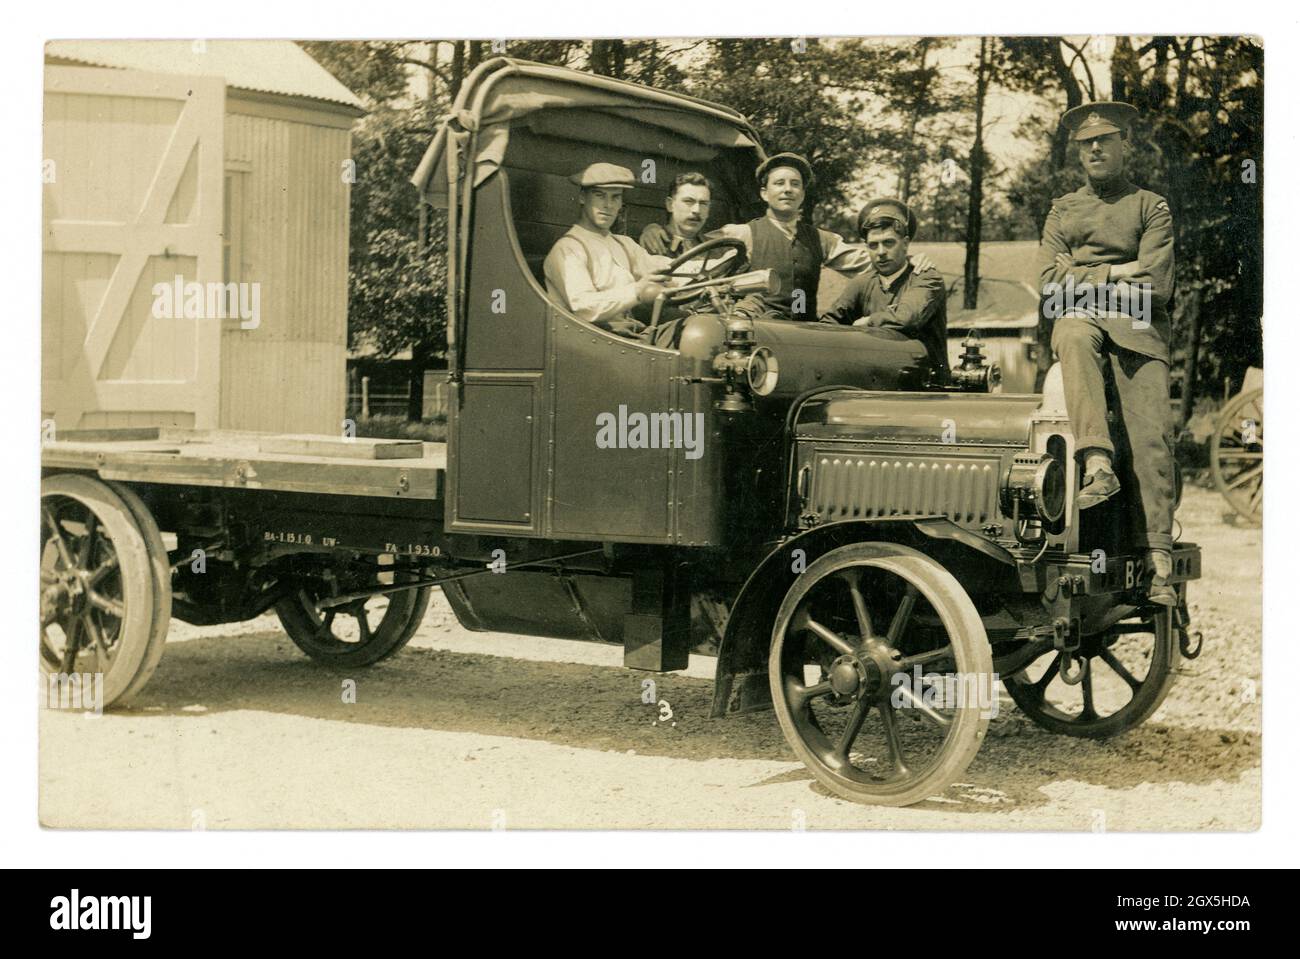 Original very clear WW1 era postcard of group young men from the Royal Flying Corps in a flatbed truck which was registered in Lancashire. Some of the men are in uniform with the RFC badge on their caps. On an army base with a hut or hangar, the wheels of a field gun can just be seen, perhaps these men were transporting artillery. circa 1917, U.K. Stock Photo